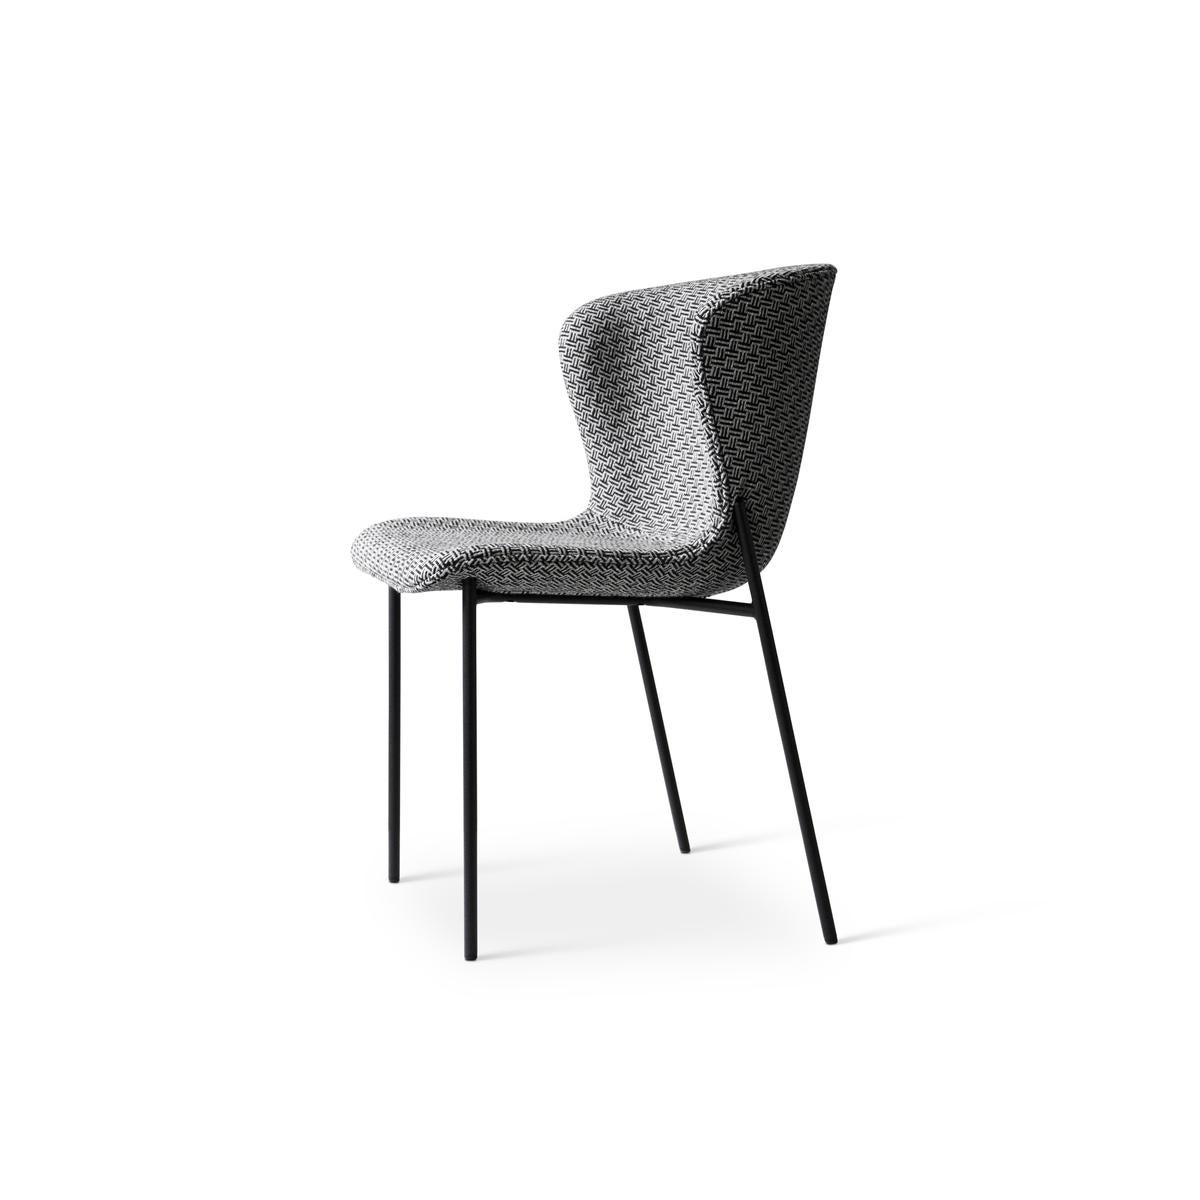 Contemporary Chair 'Pipe' in Leather, Dakar 0197, Chrome Frame For Sale 11